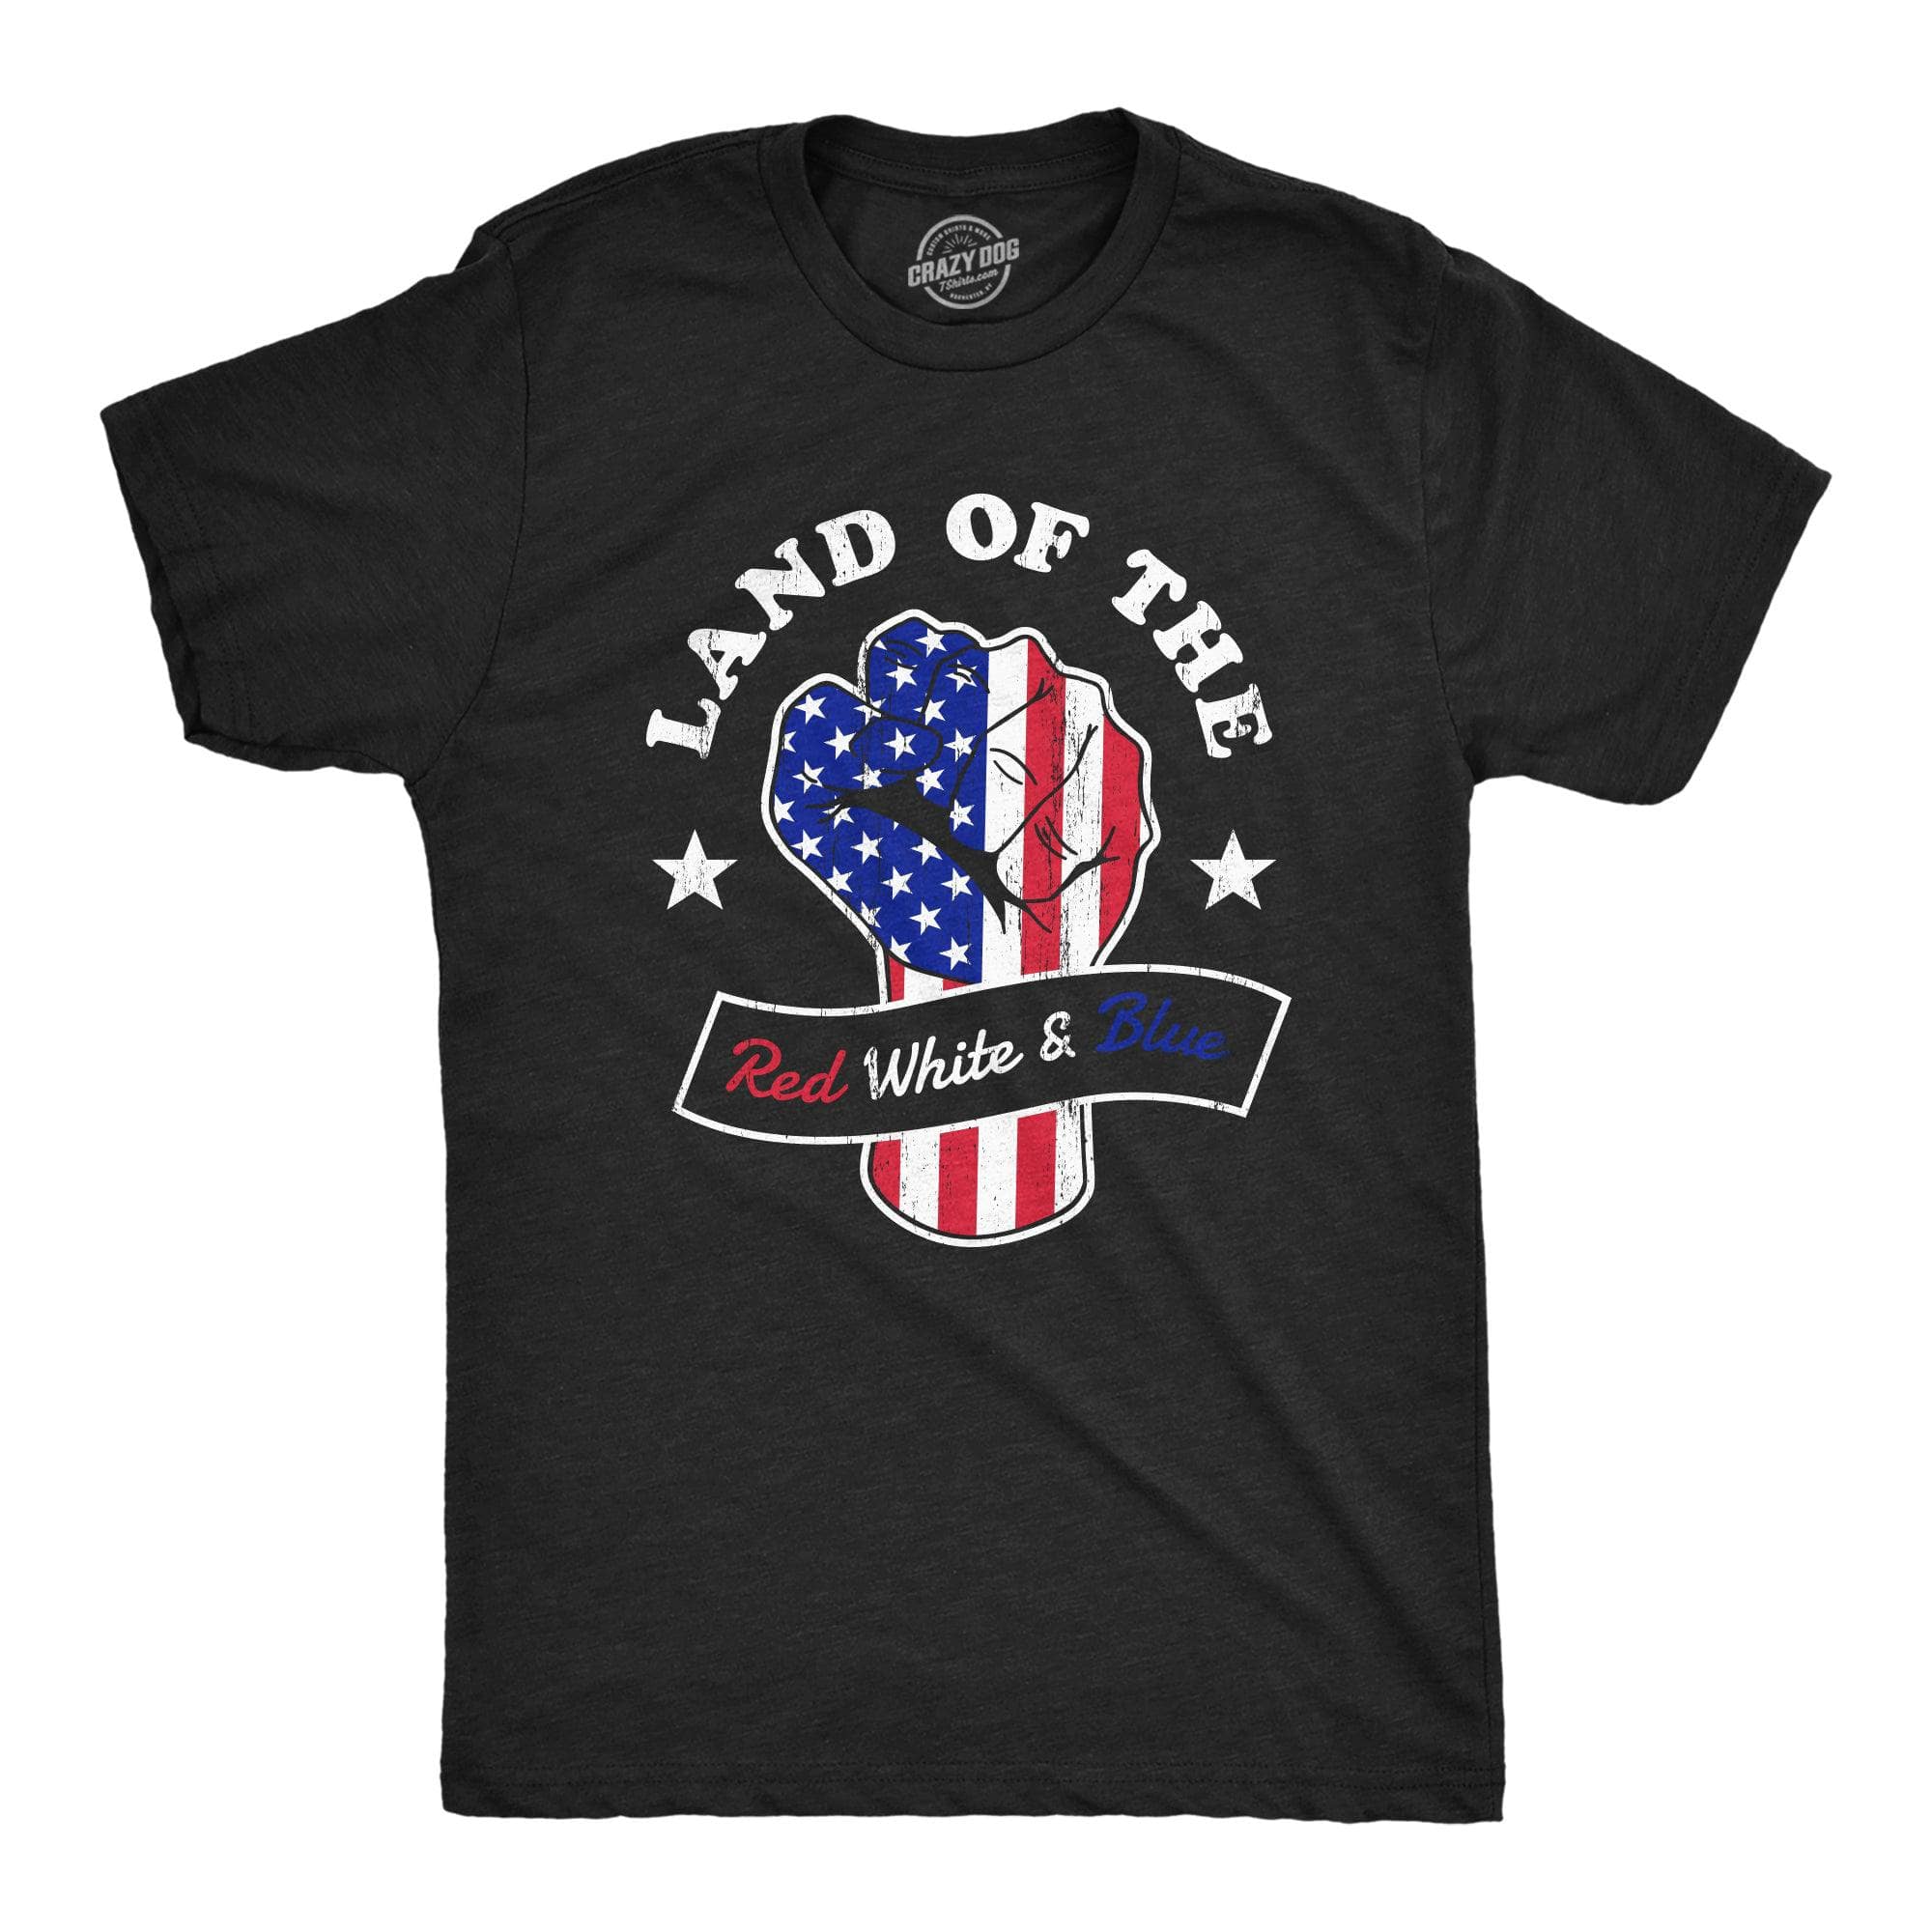 Land Of The Red White And Blue Men's Tshirt  -  Crazy Dog T-Shirts